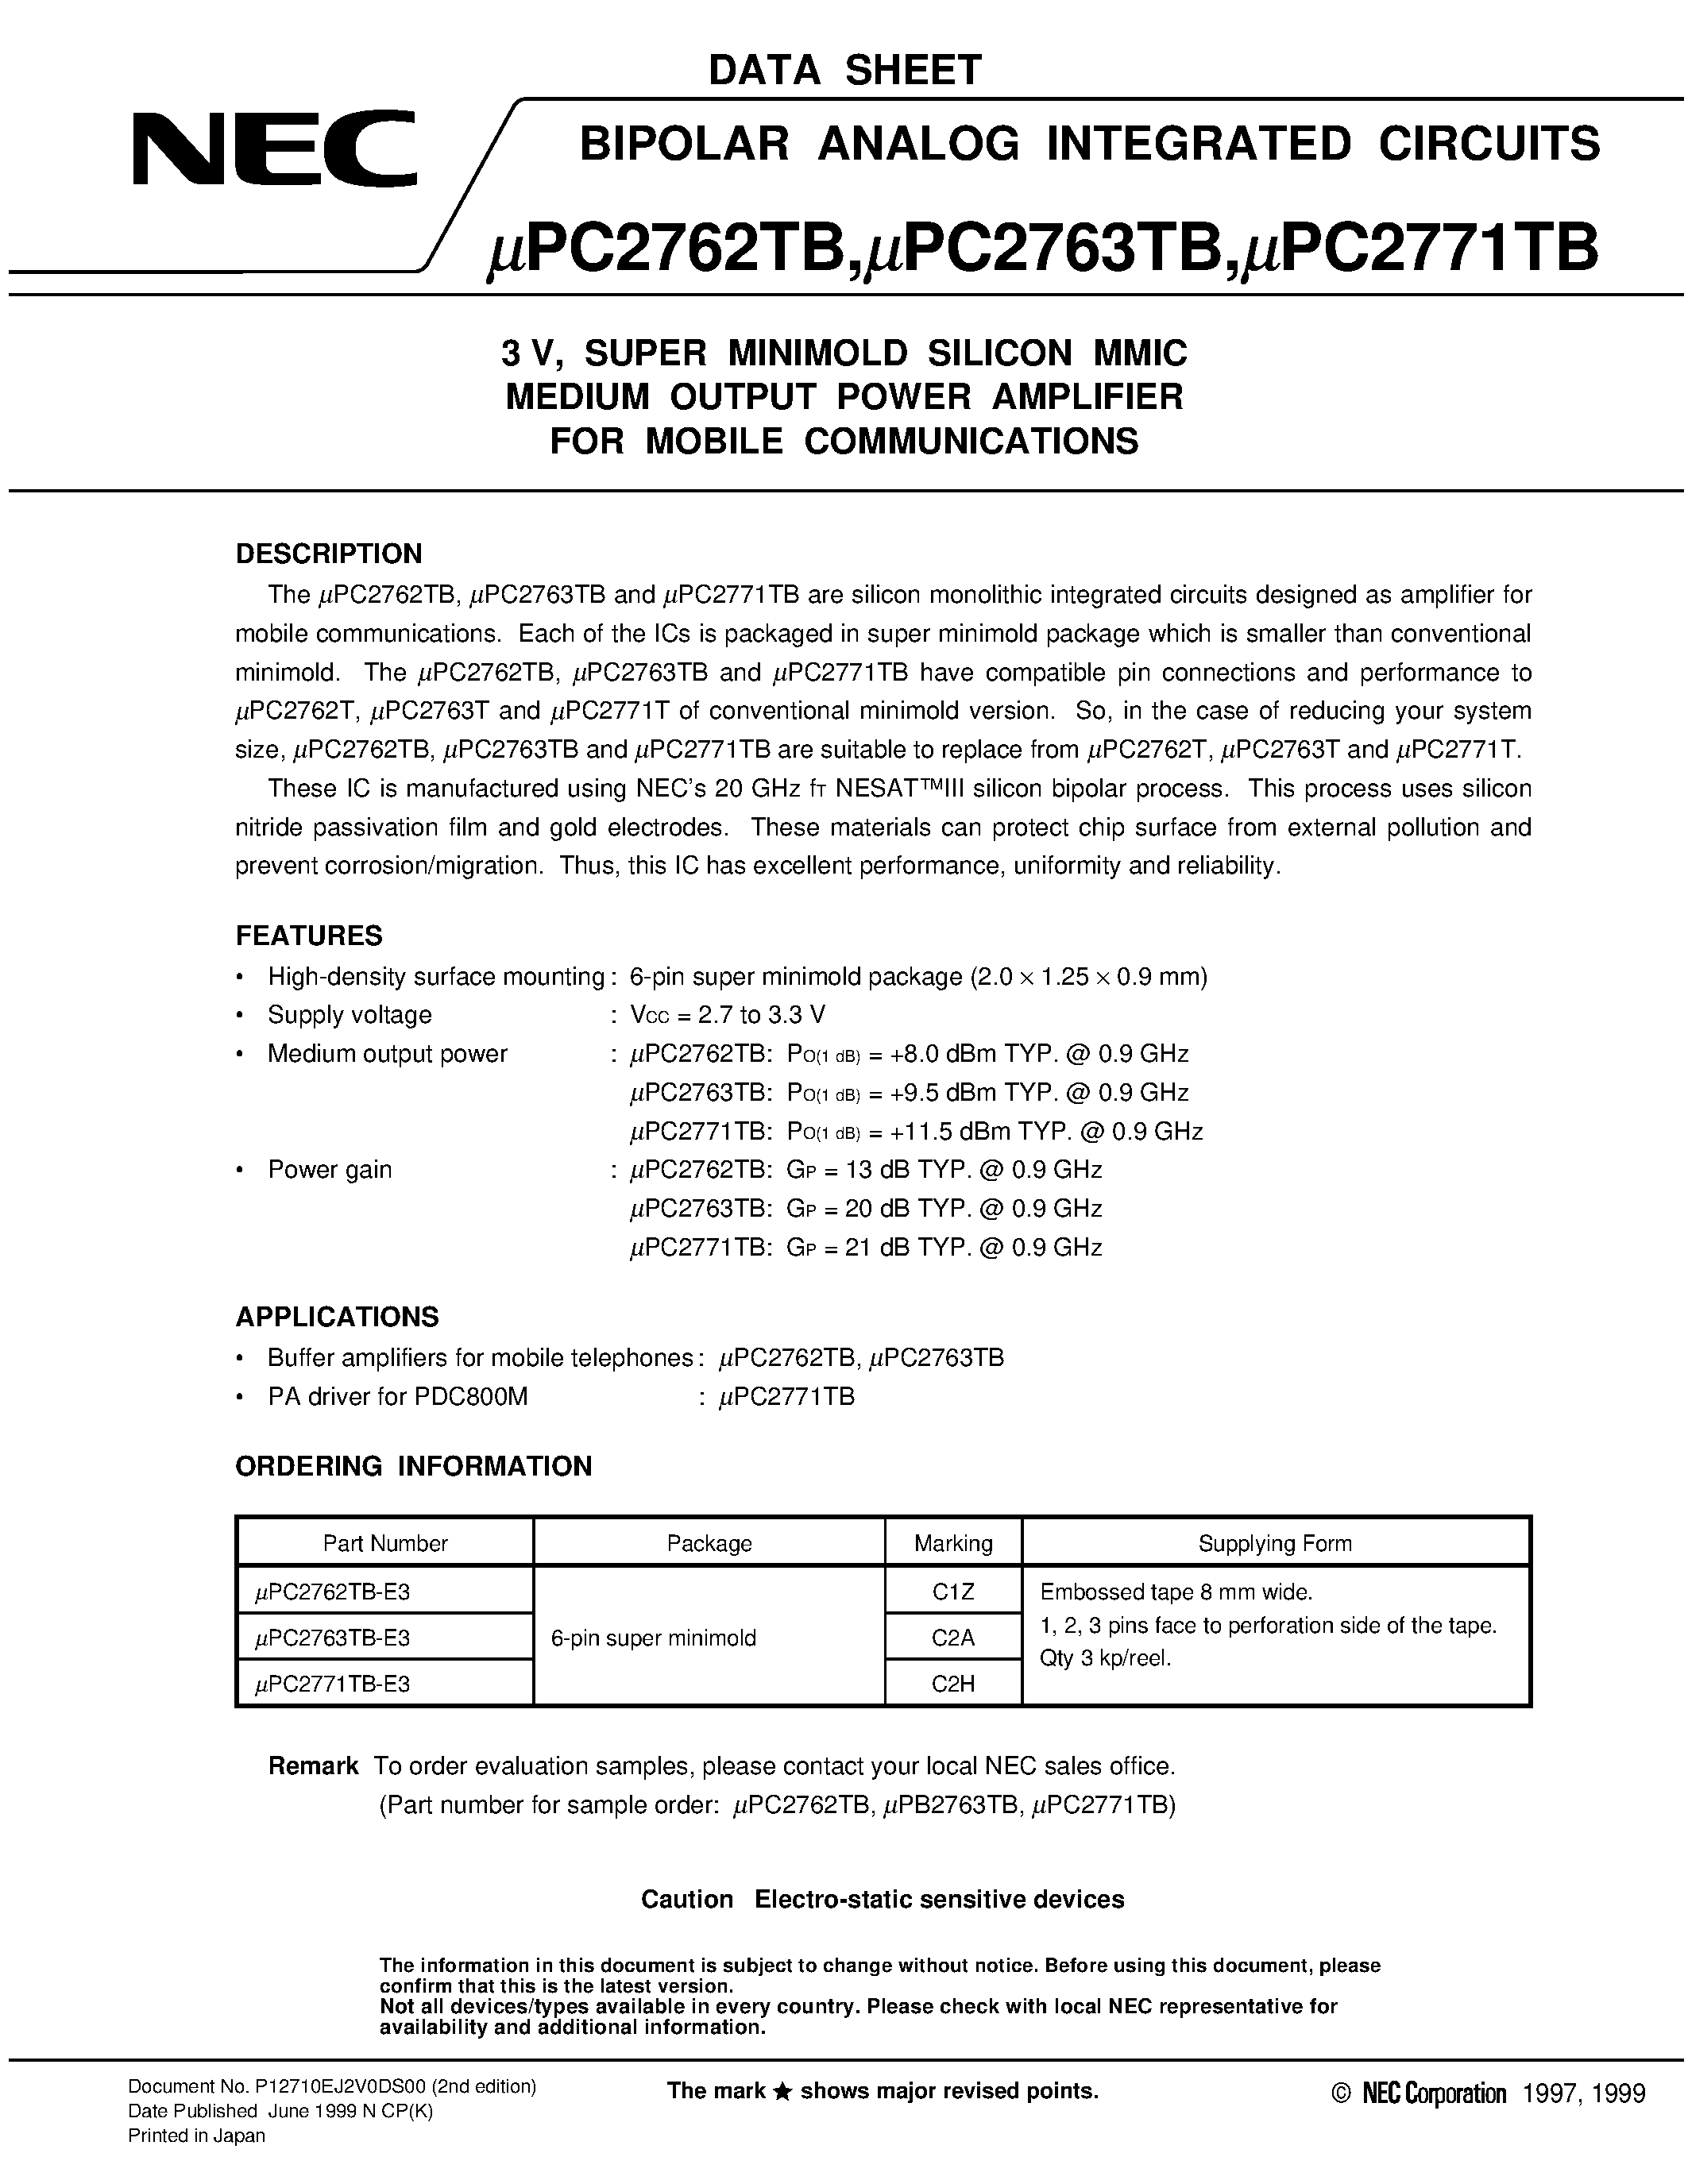 Datasheet UPC2771TB - 3 V/ 2.9 GHz SILICON MMIC MEDIUM OUTPUT POWER AMPLIFIER FOR MOBILE COMMUNICATIONS page 1